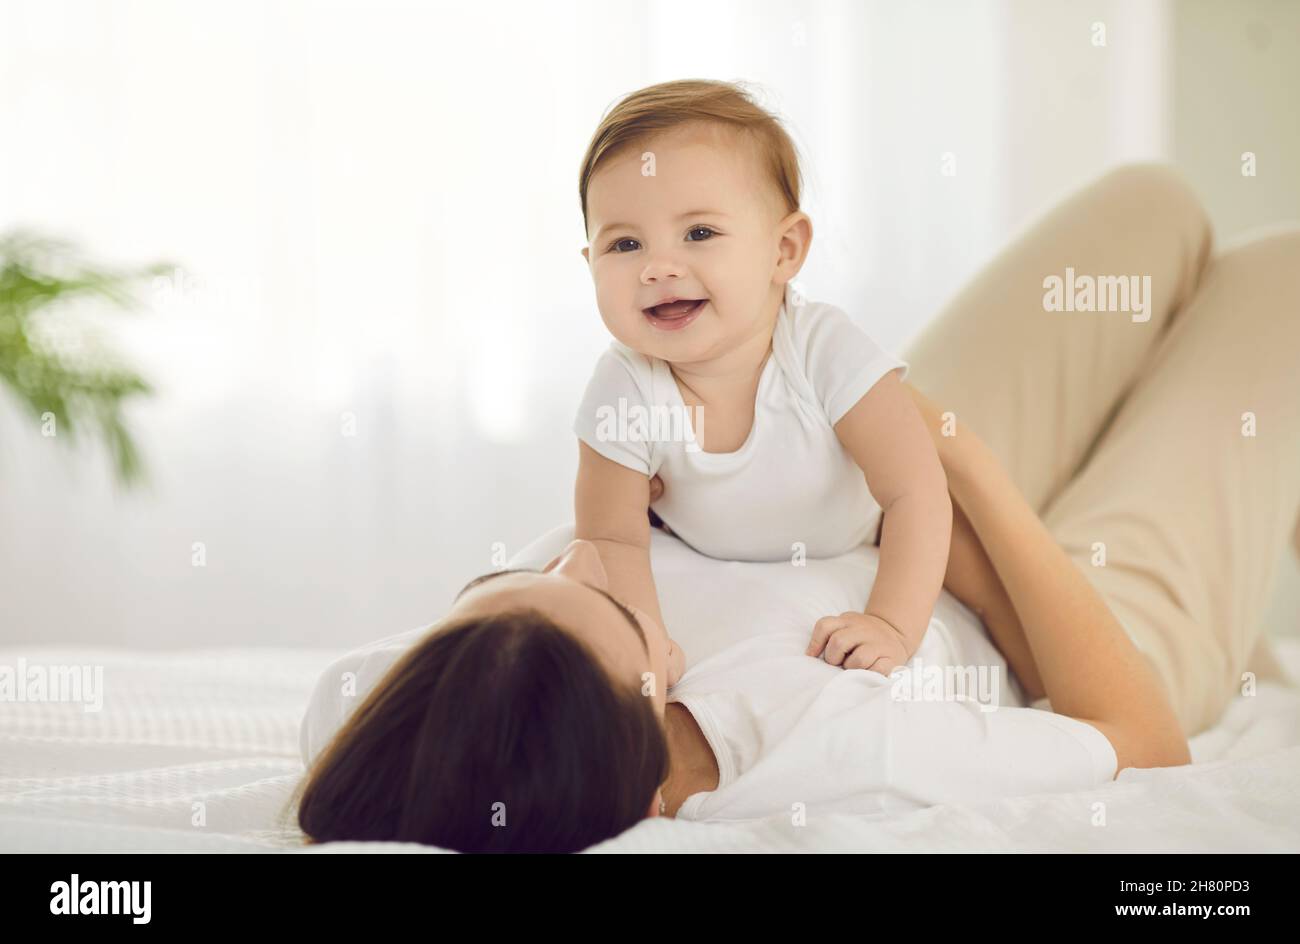 Little baby girl and her mom in morning having fun together playing on white bed. Stock Photo